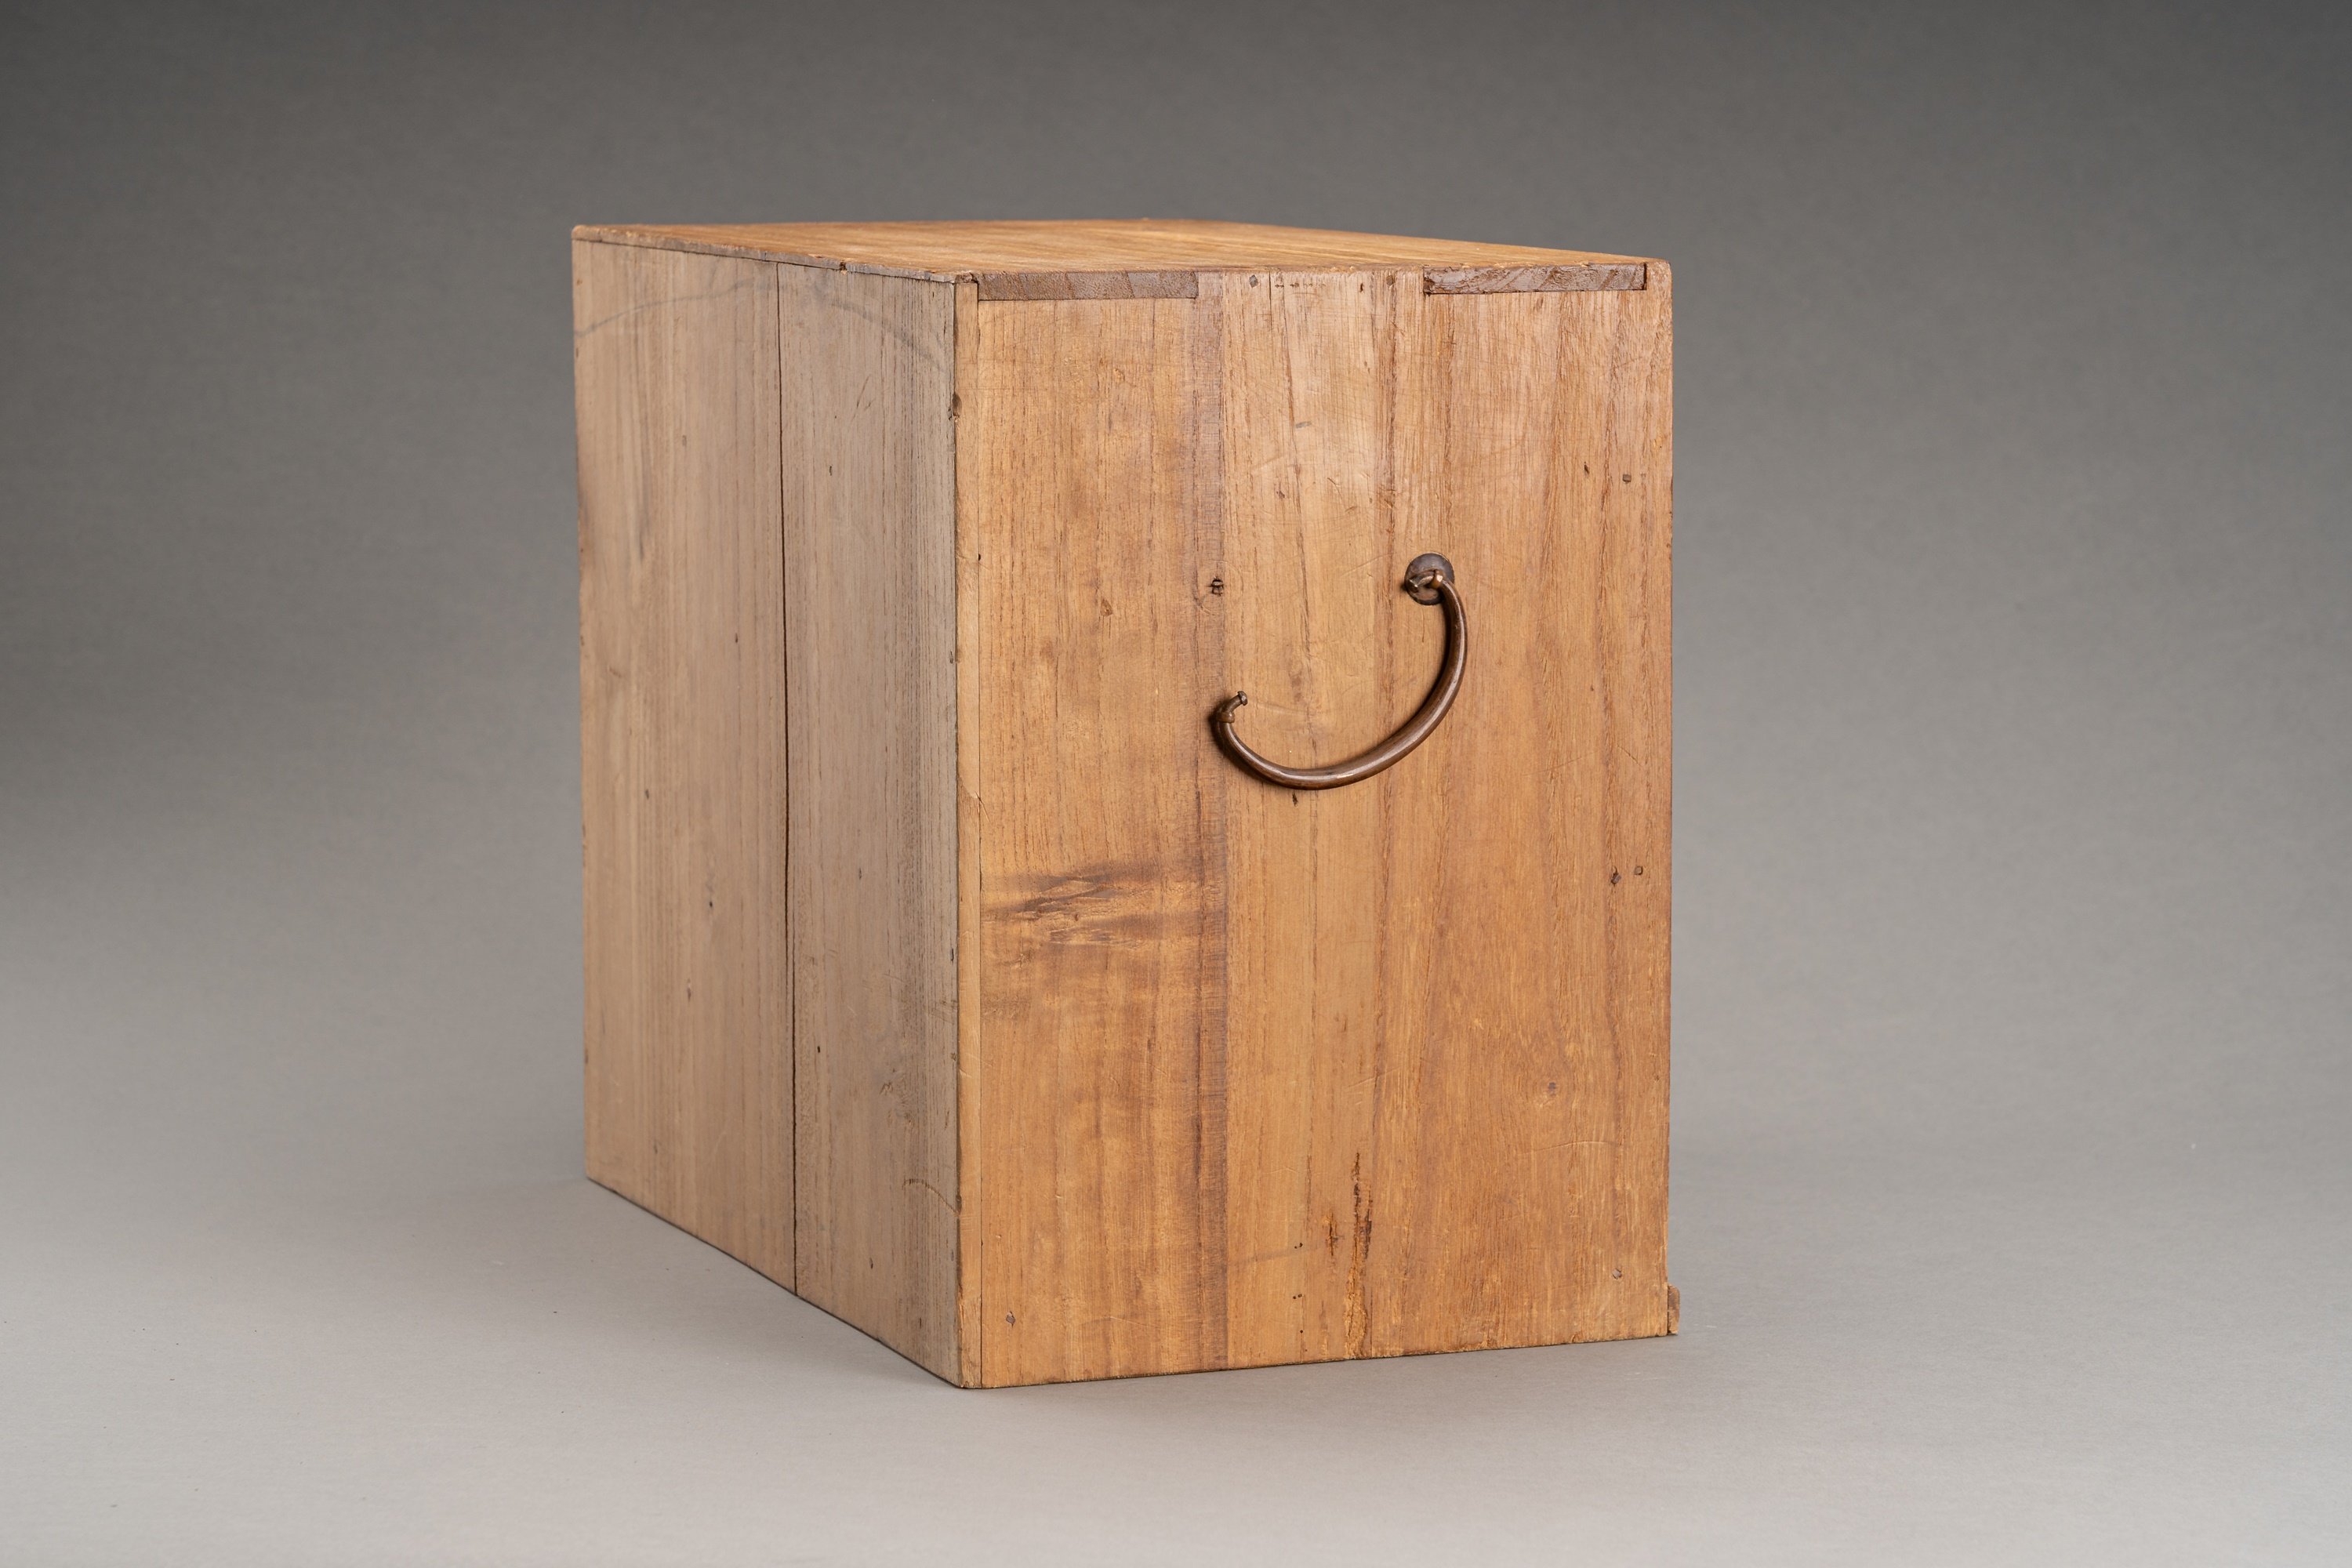 A WOODEN JAPANESE STORAGE BOX WITH 5 DRAWERS - Image 7 of 8